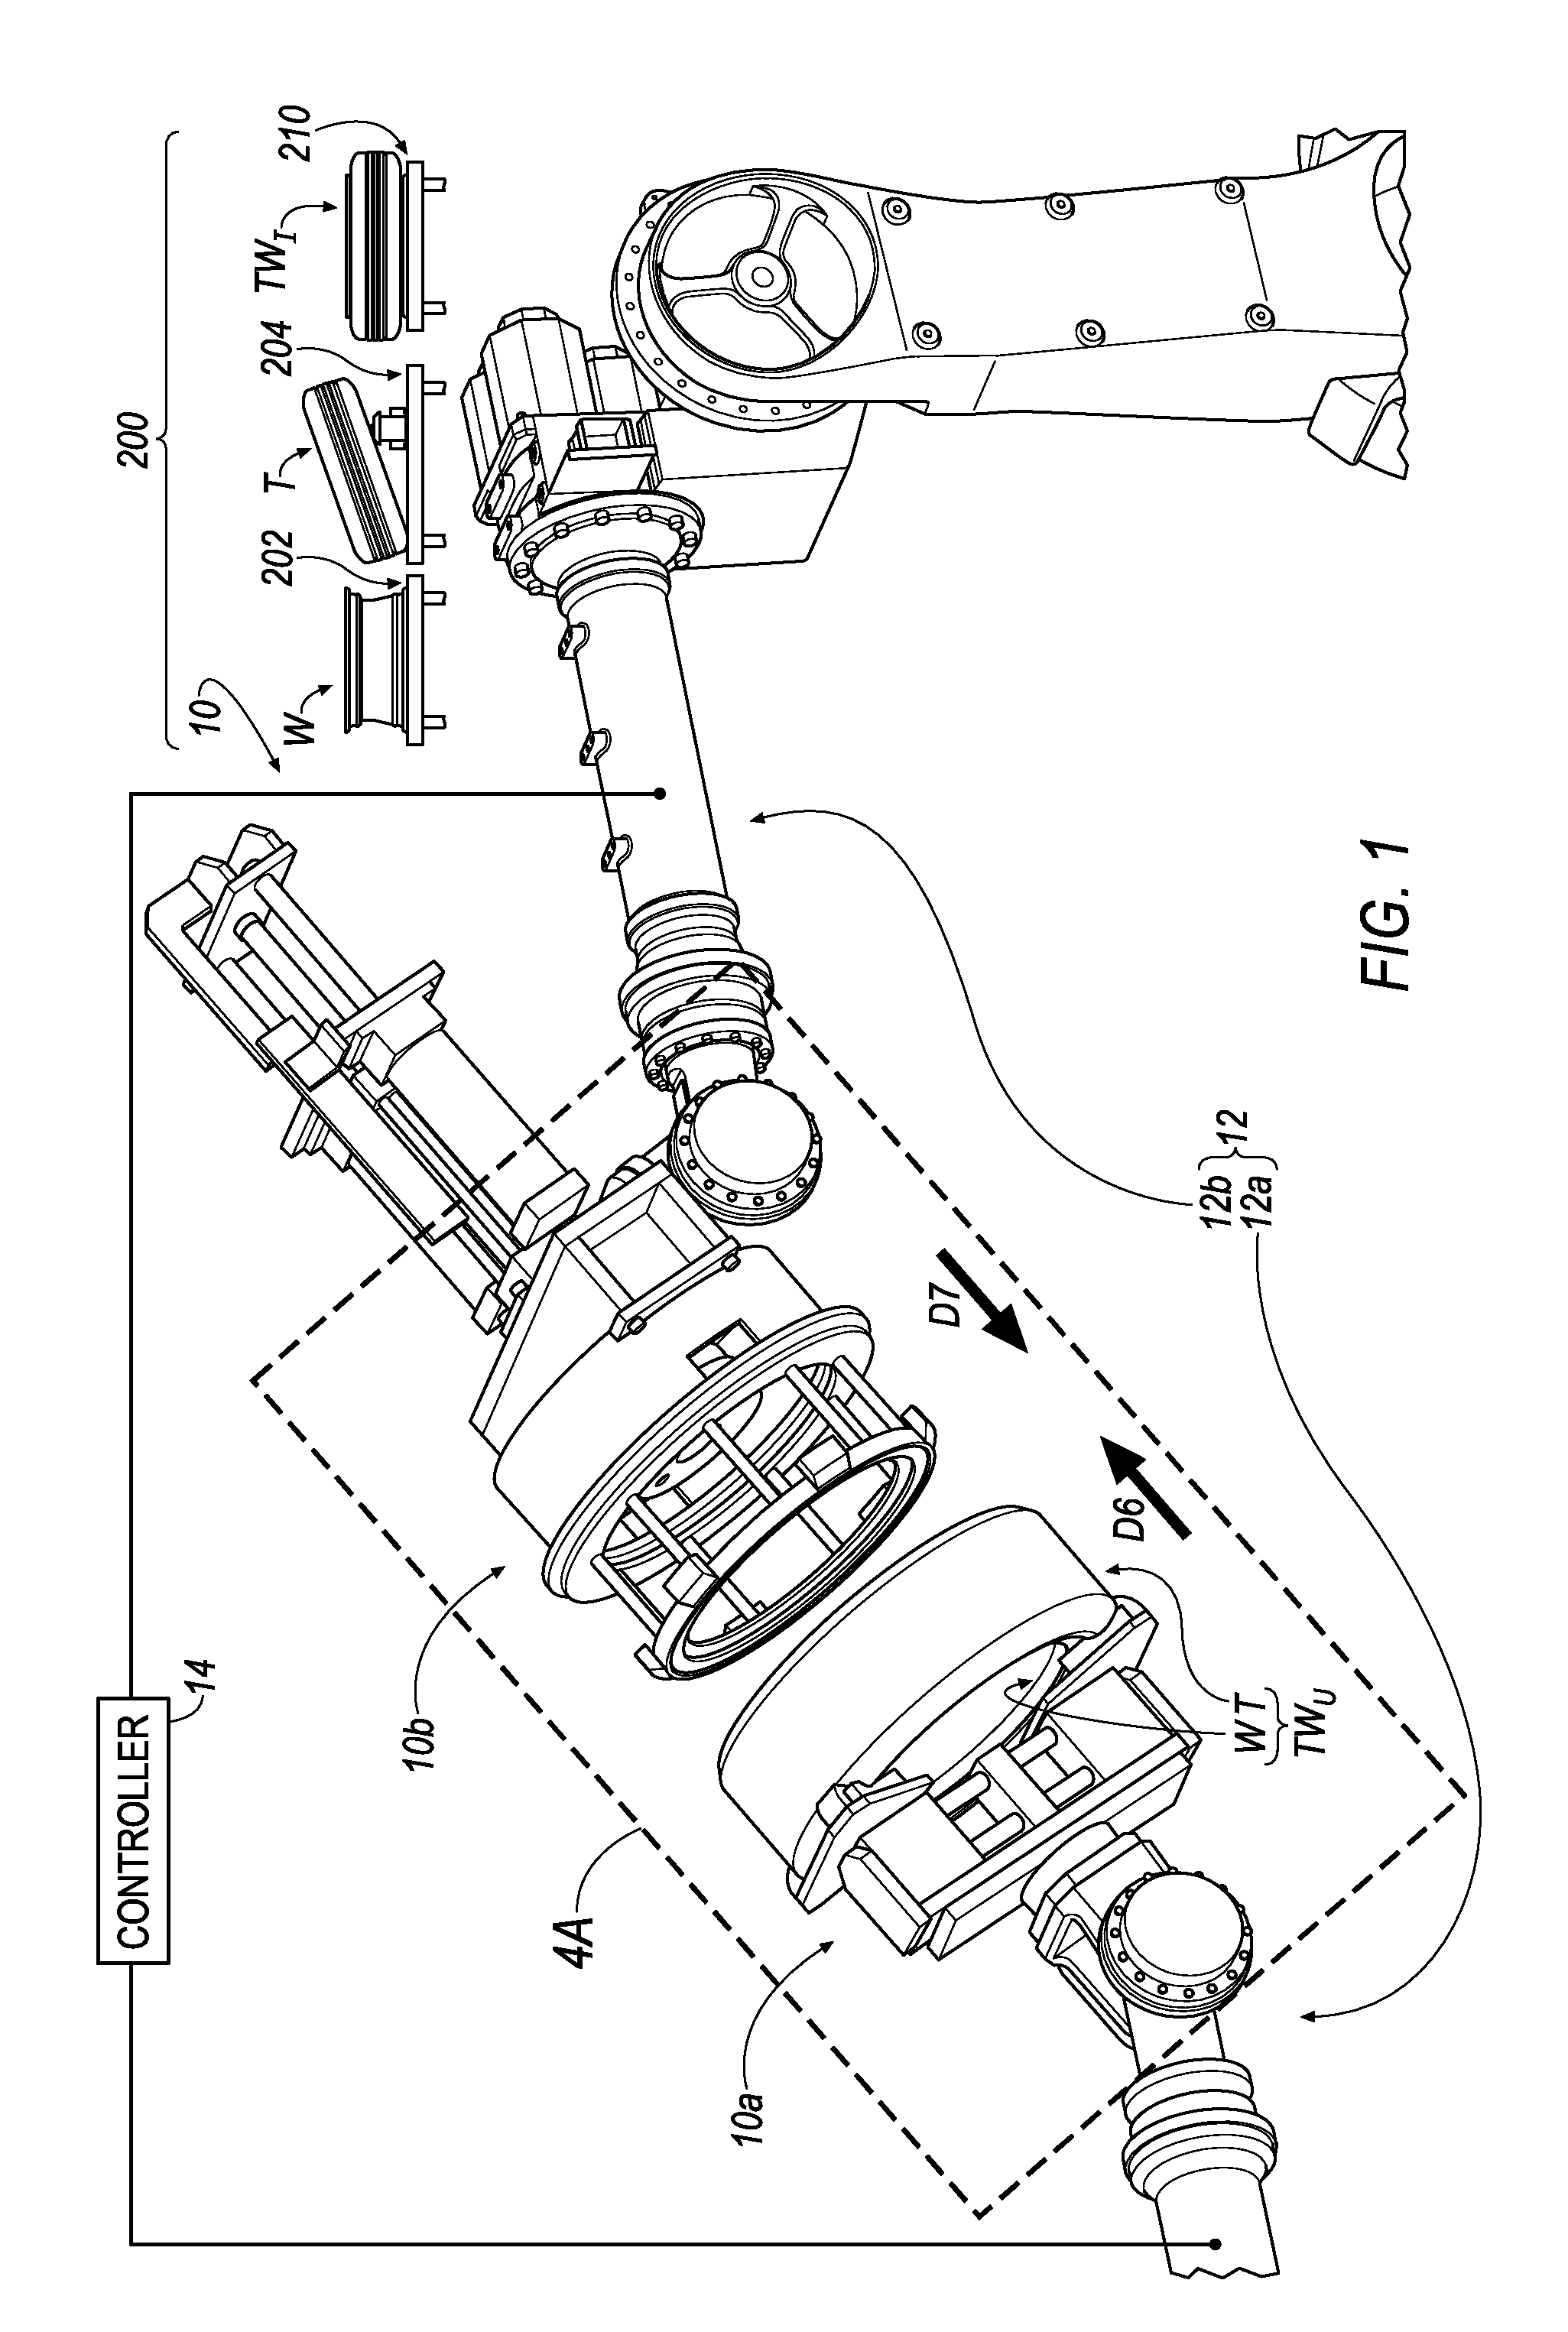 Apparatus, Methods, Components, and Systems for Assembling and/or Inflating a Tire-Wheel Assembly